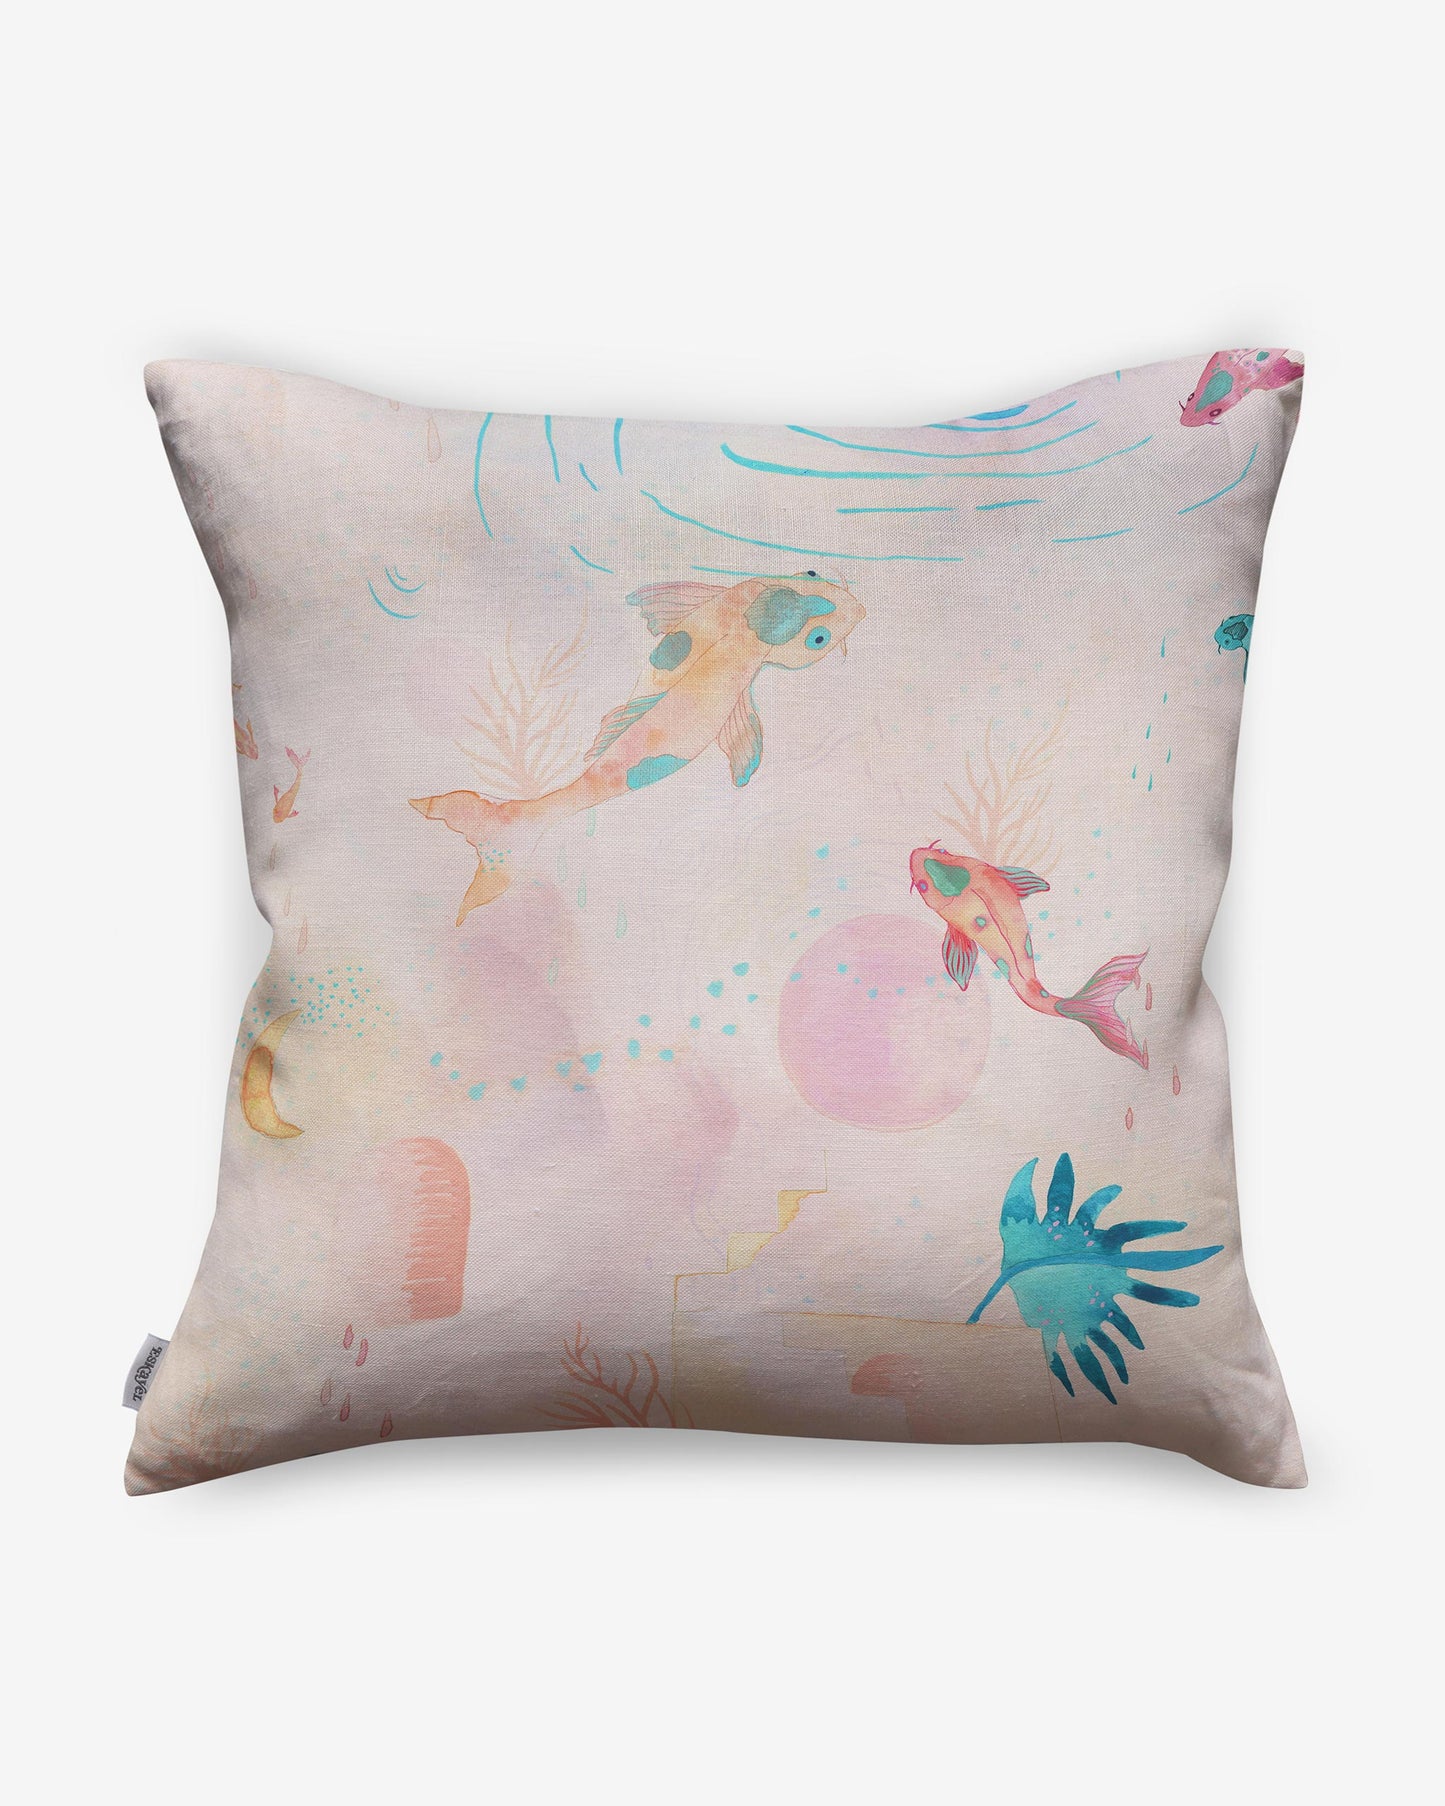 Water Signs Pillow||Multi